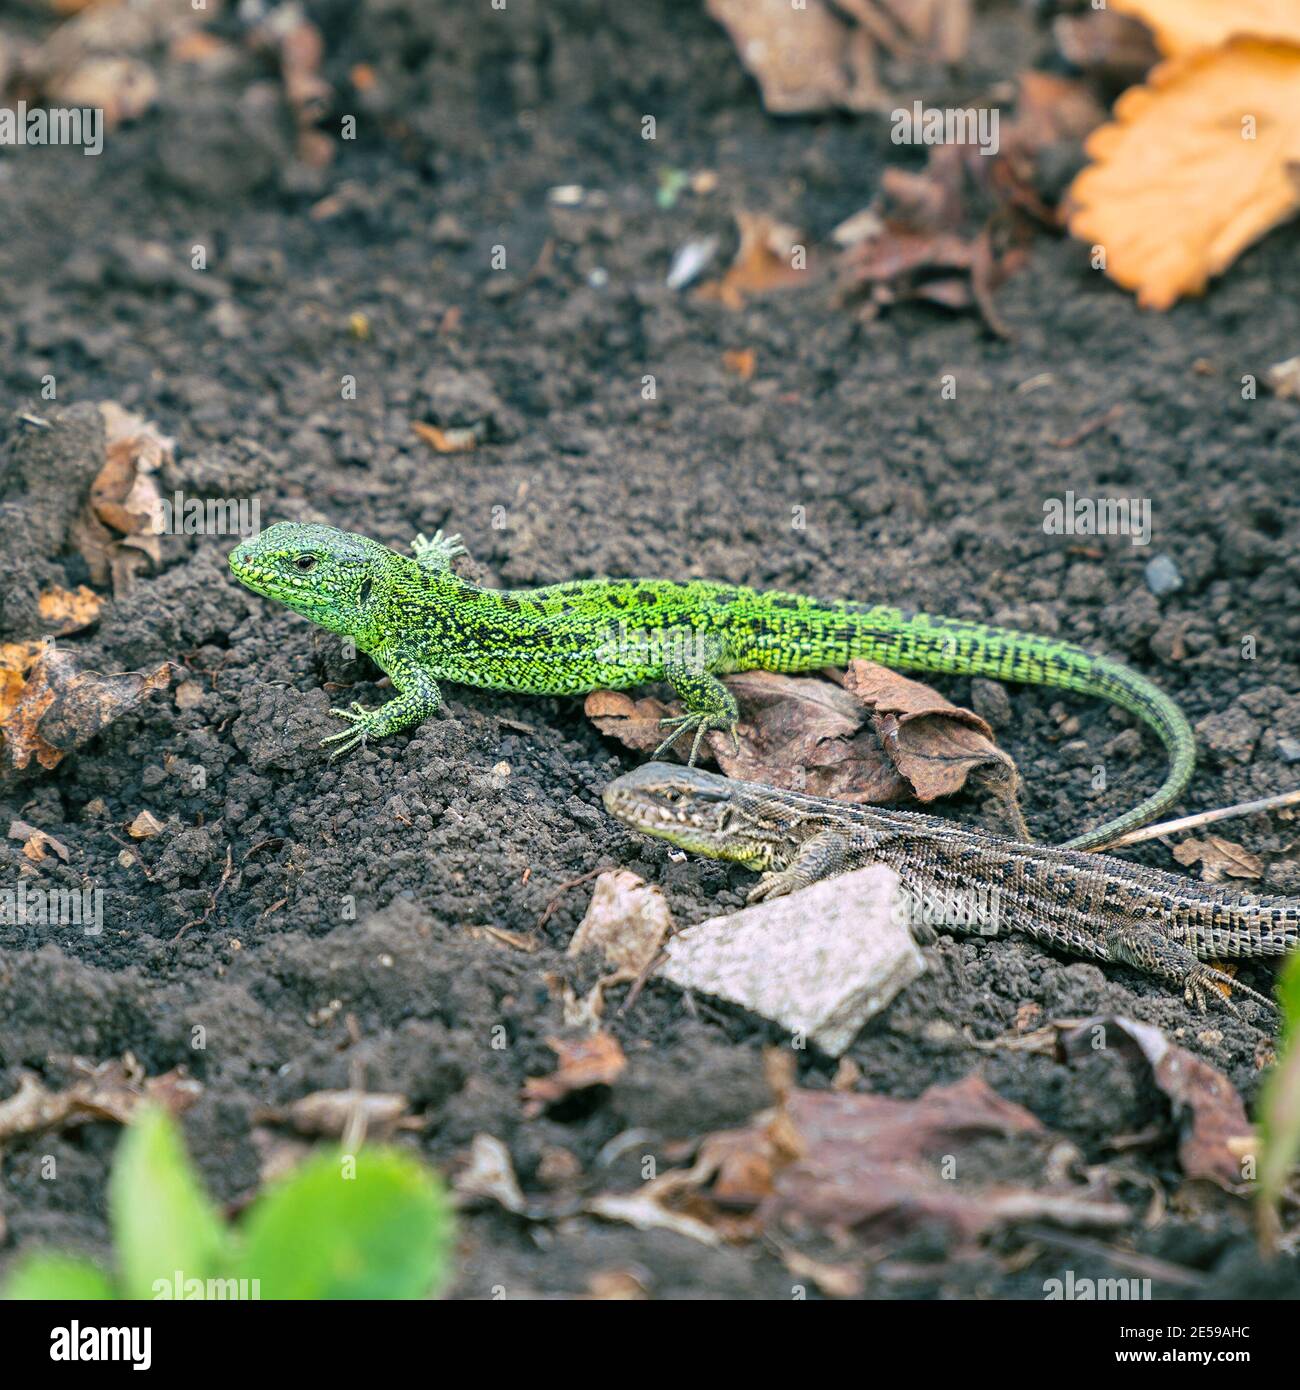 A small green lizard on the ground. Selective focus Stock Photo